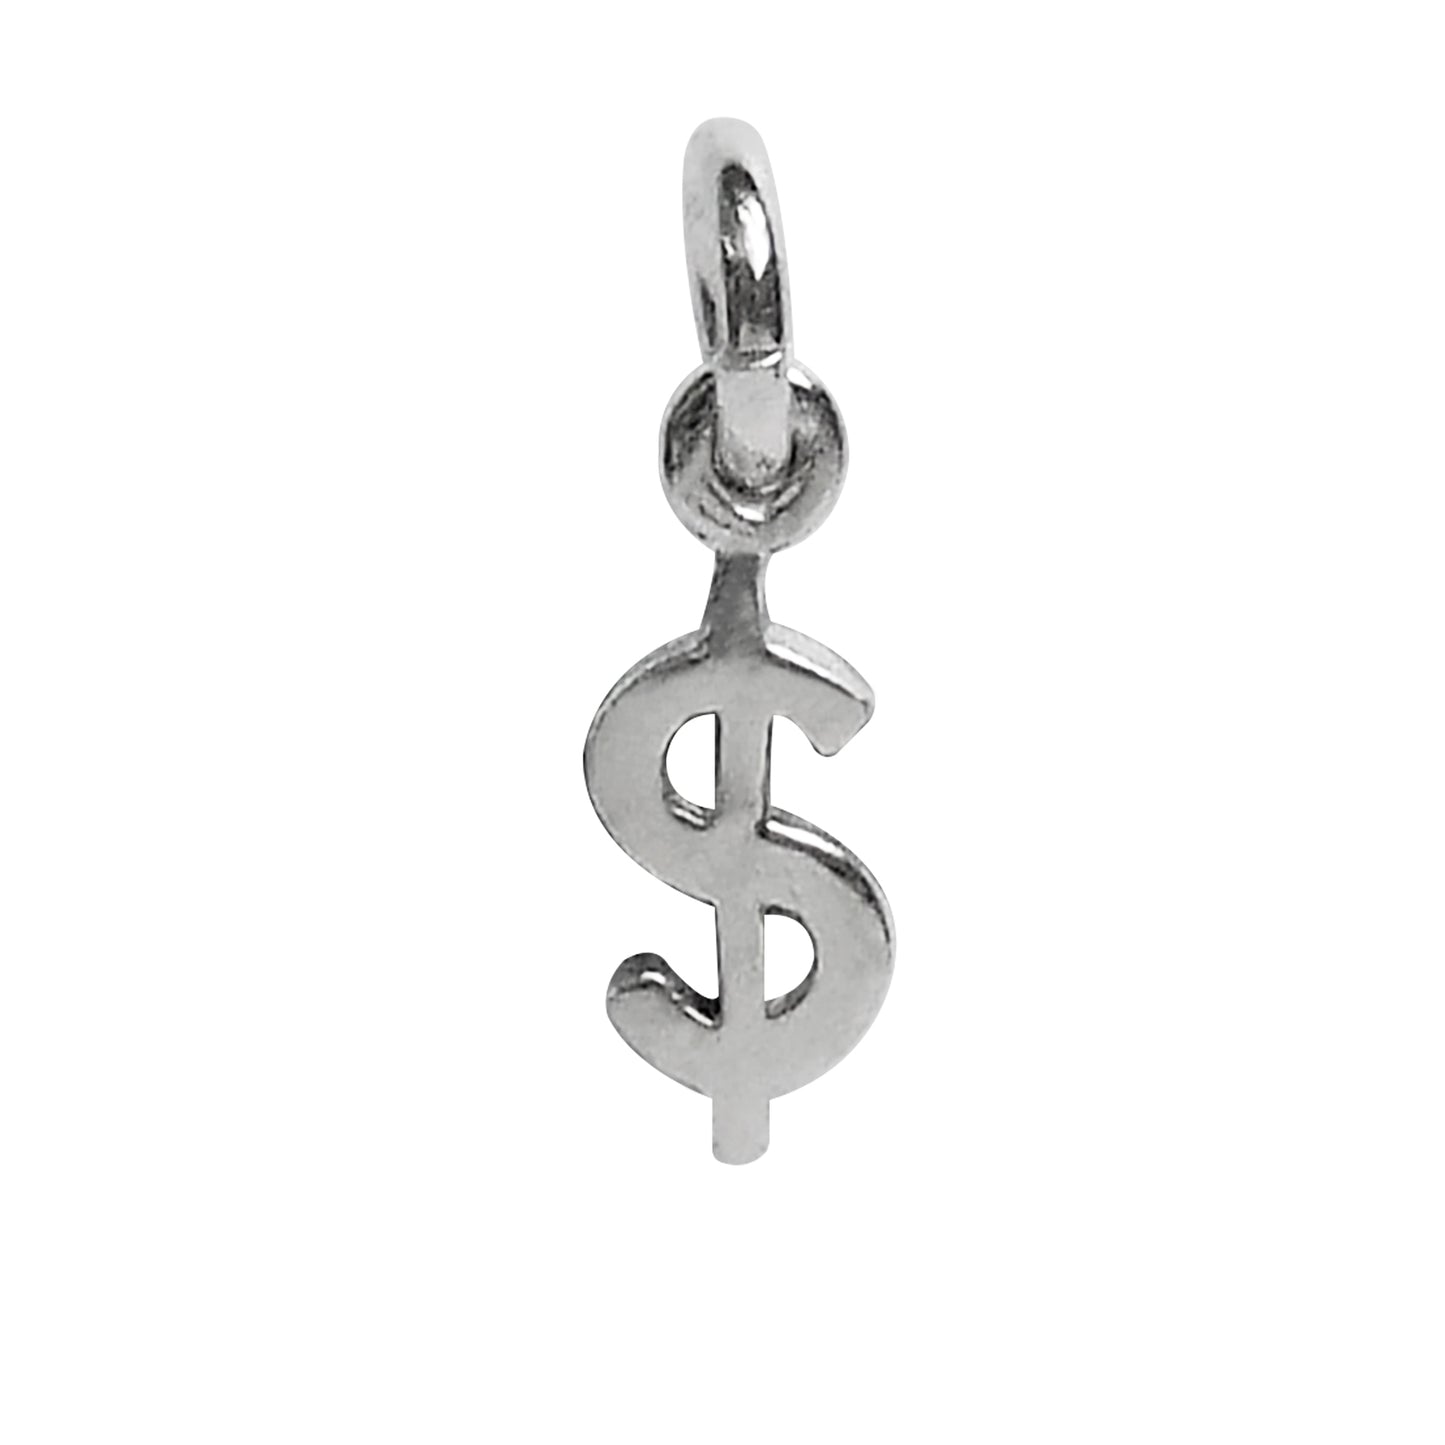 Small dollar sign charm sterling silver or gold